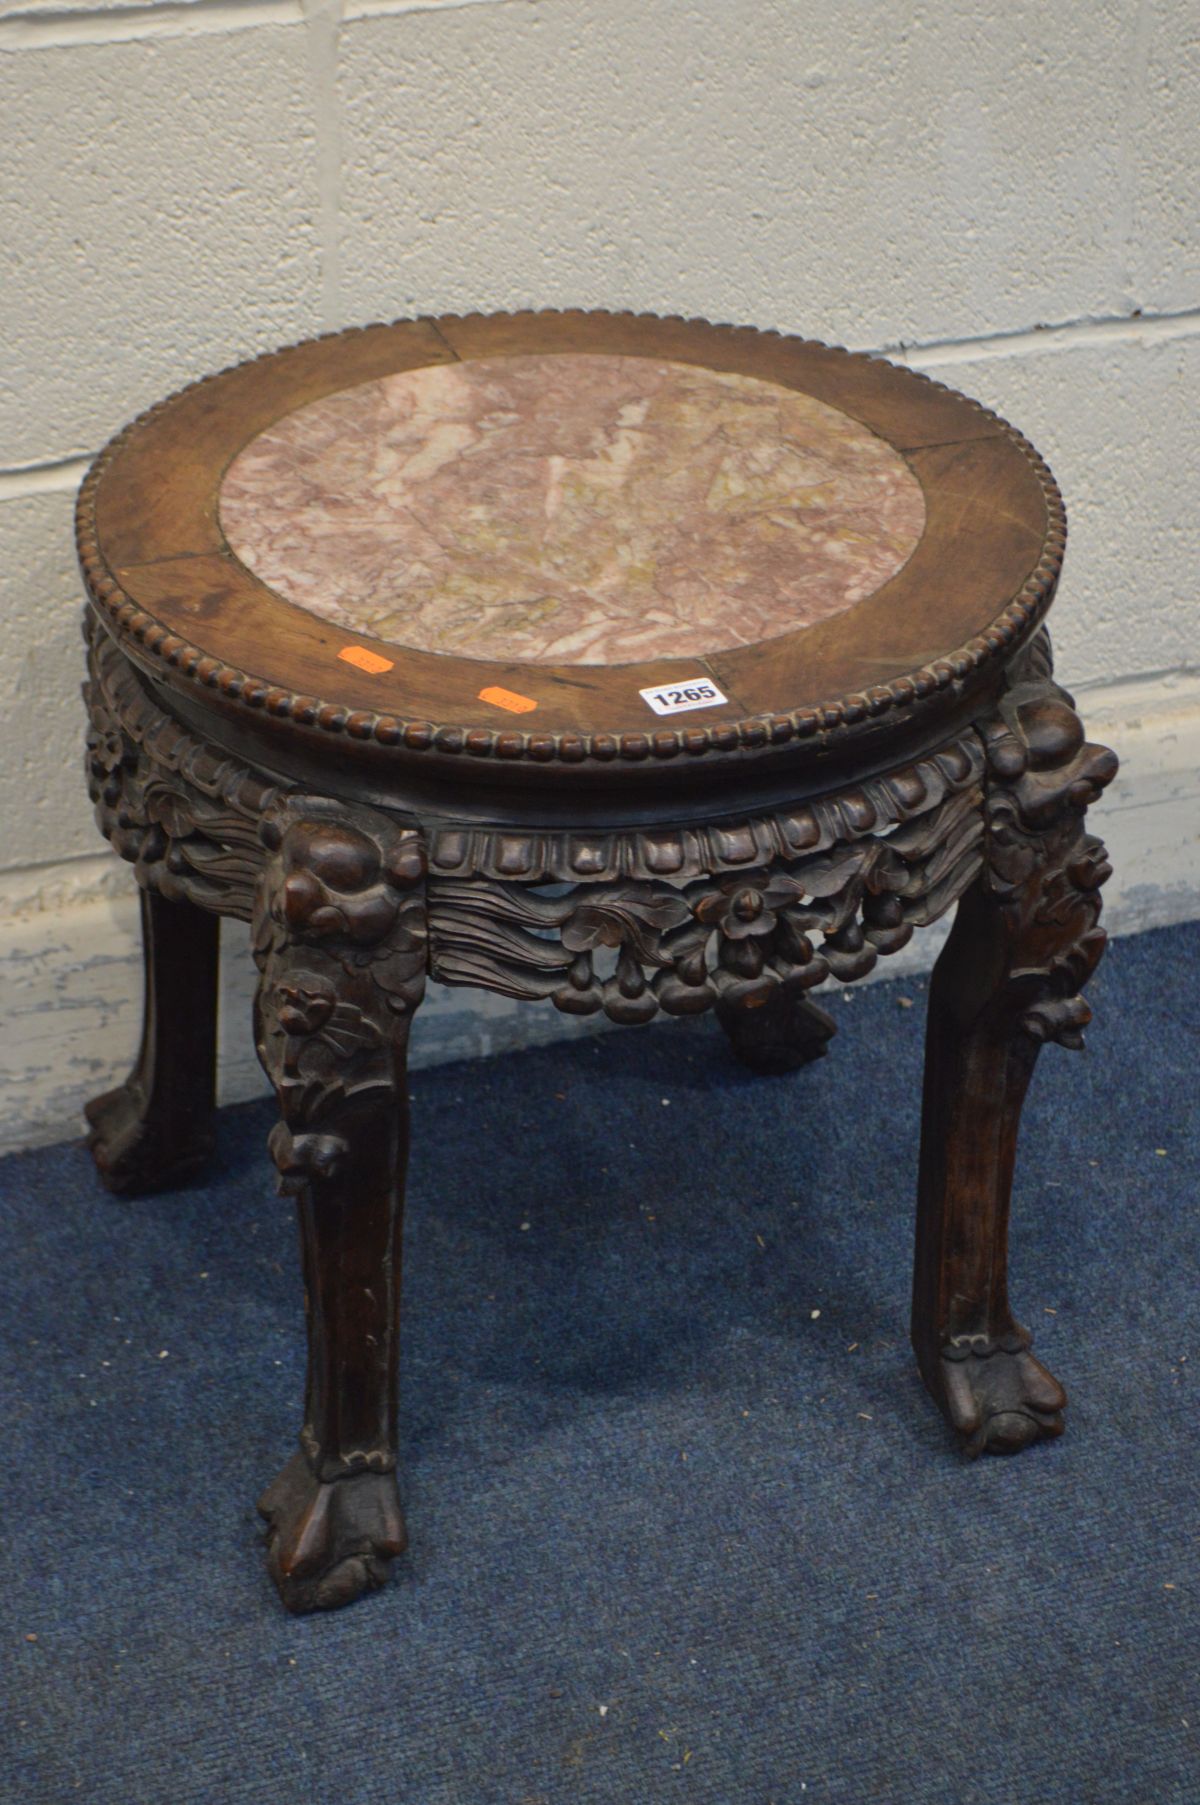 AN ORIENTAL ROSEWOOD OCCASIONAL TABLE with a pink marble insert, and elaborate carving, diameter